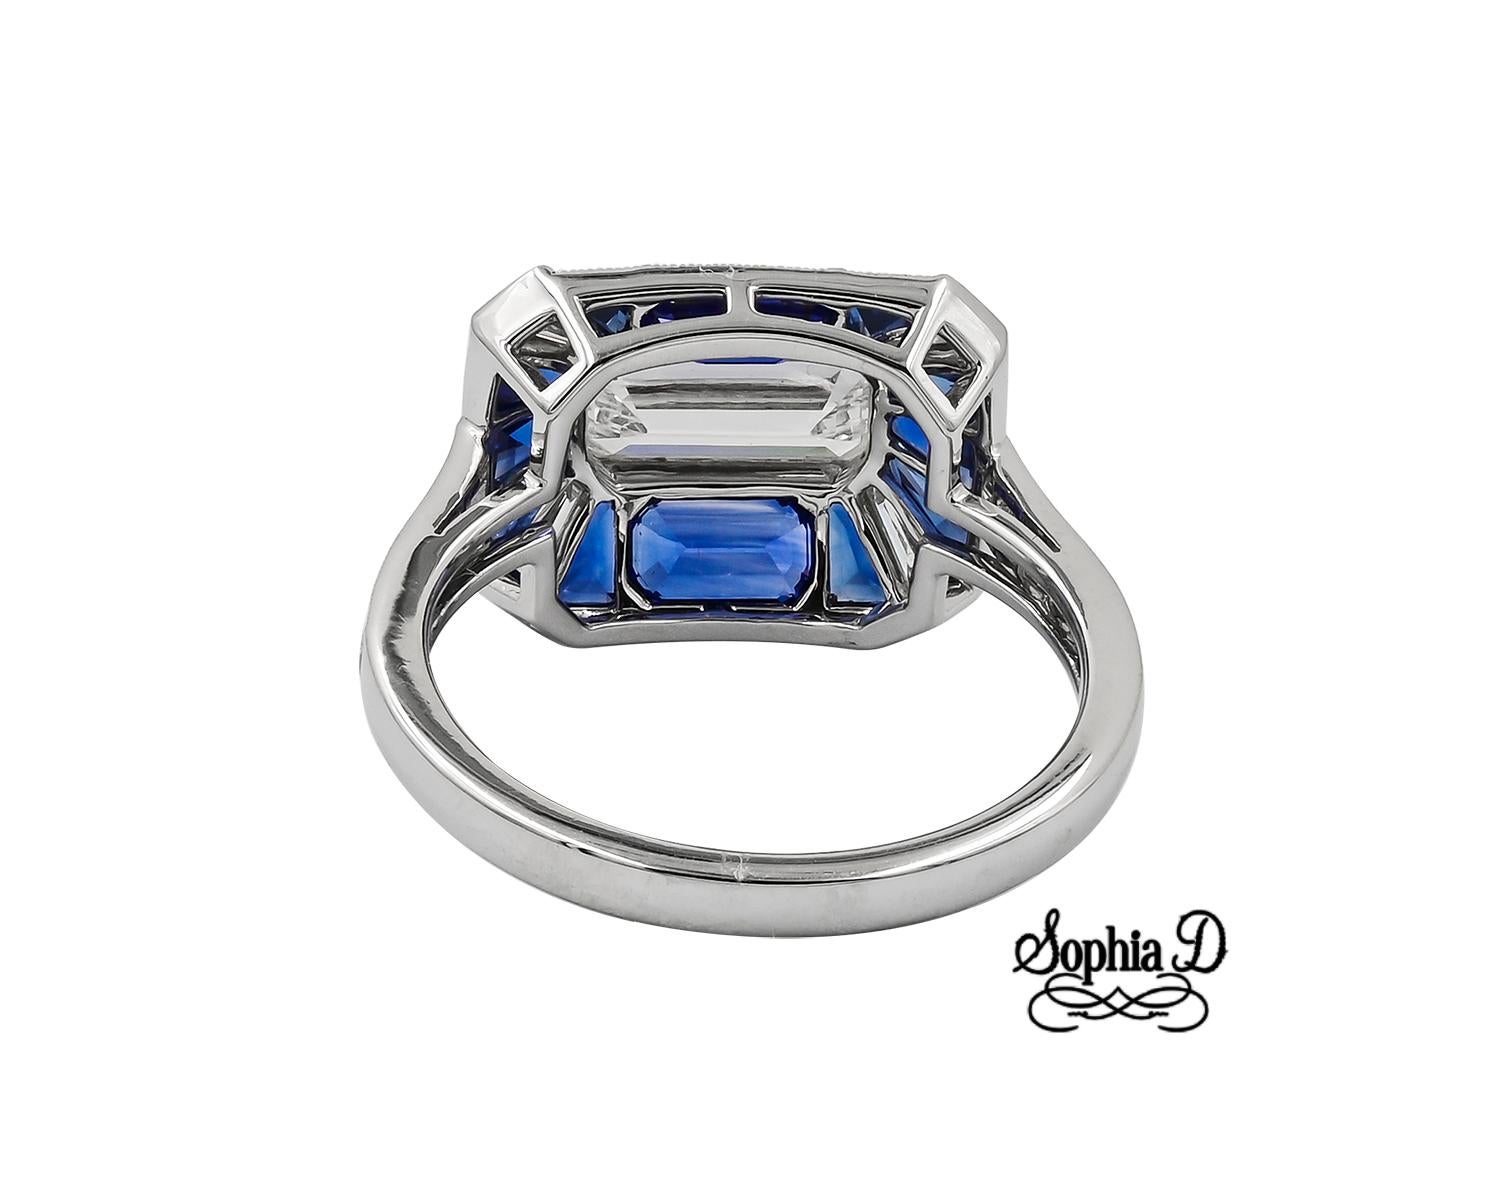 Sophia D 1.30 carat baguette cut diamond center ring set in platinum accentuated with 0.69 carat diamonds and 1.87 carat blue sapphires.

The size is a 6.5 and available for resizing.

Sophia D by Joseph Dardashti LTD has been known worldwide for 35